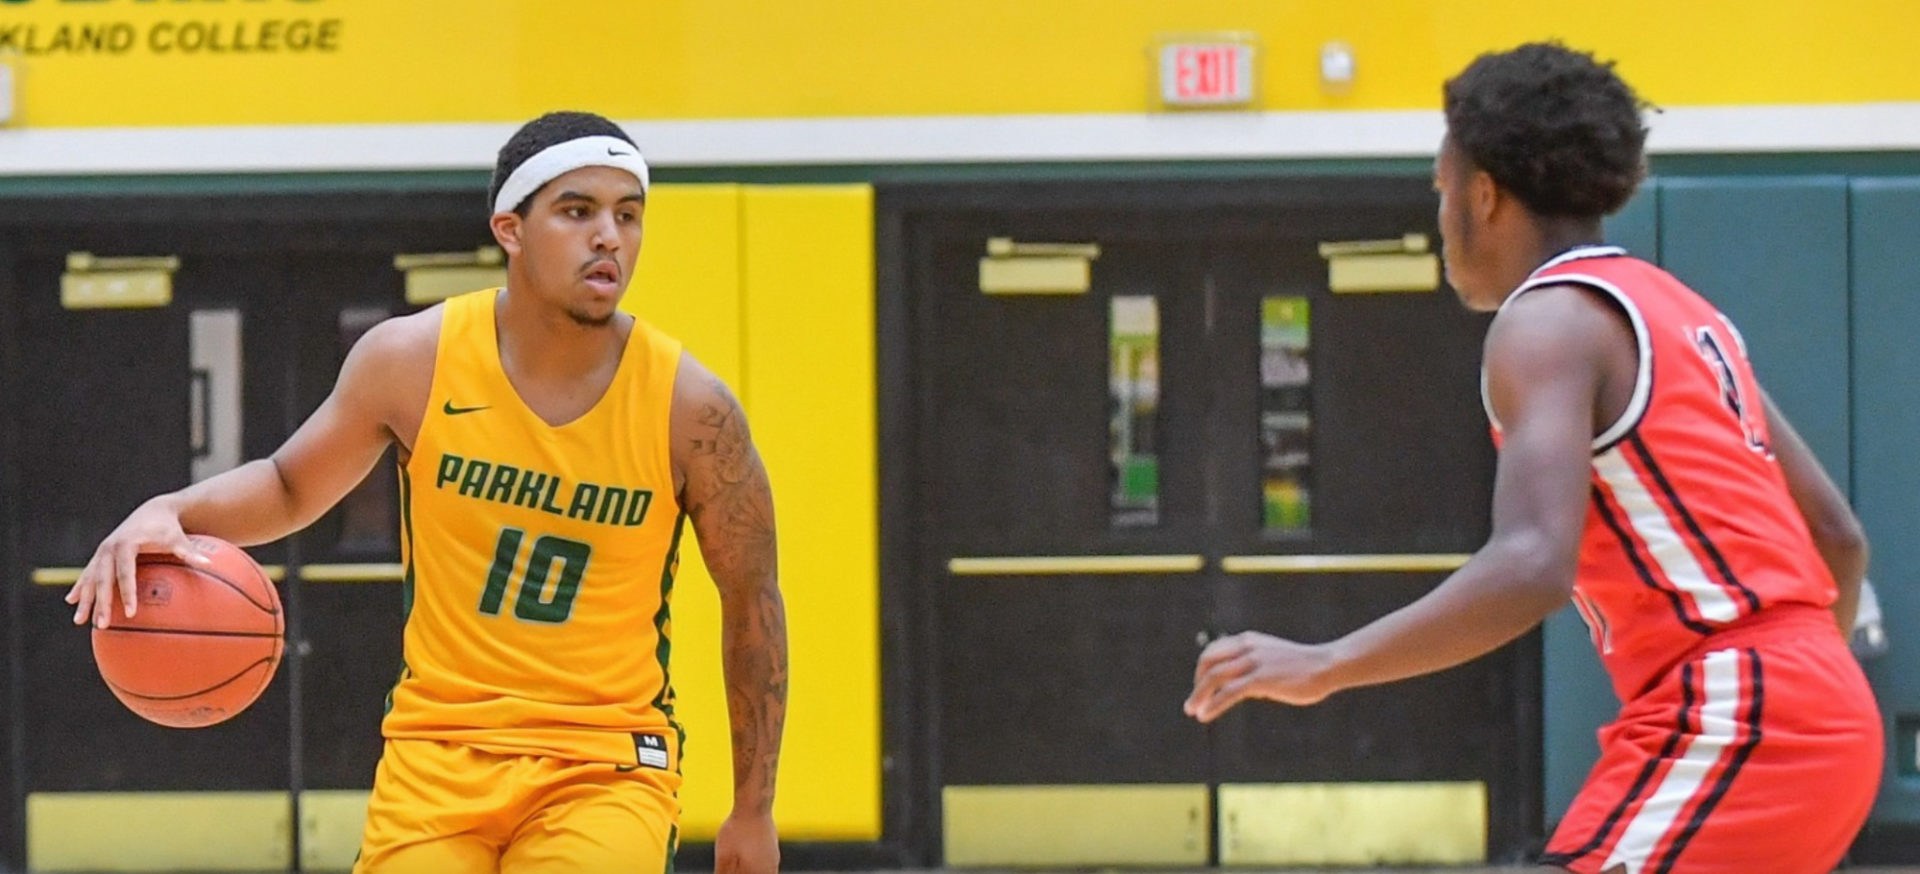 Parkland College men's basketball player Brylan Phillips, a Black man, wears a yellow Parkland uniform and a white nike sweatband. He is dribbling a basketball. A player from the opponent's team, a Black man wearing a red uniform, guards him. They are in a gym with yellow walls.